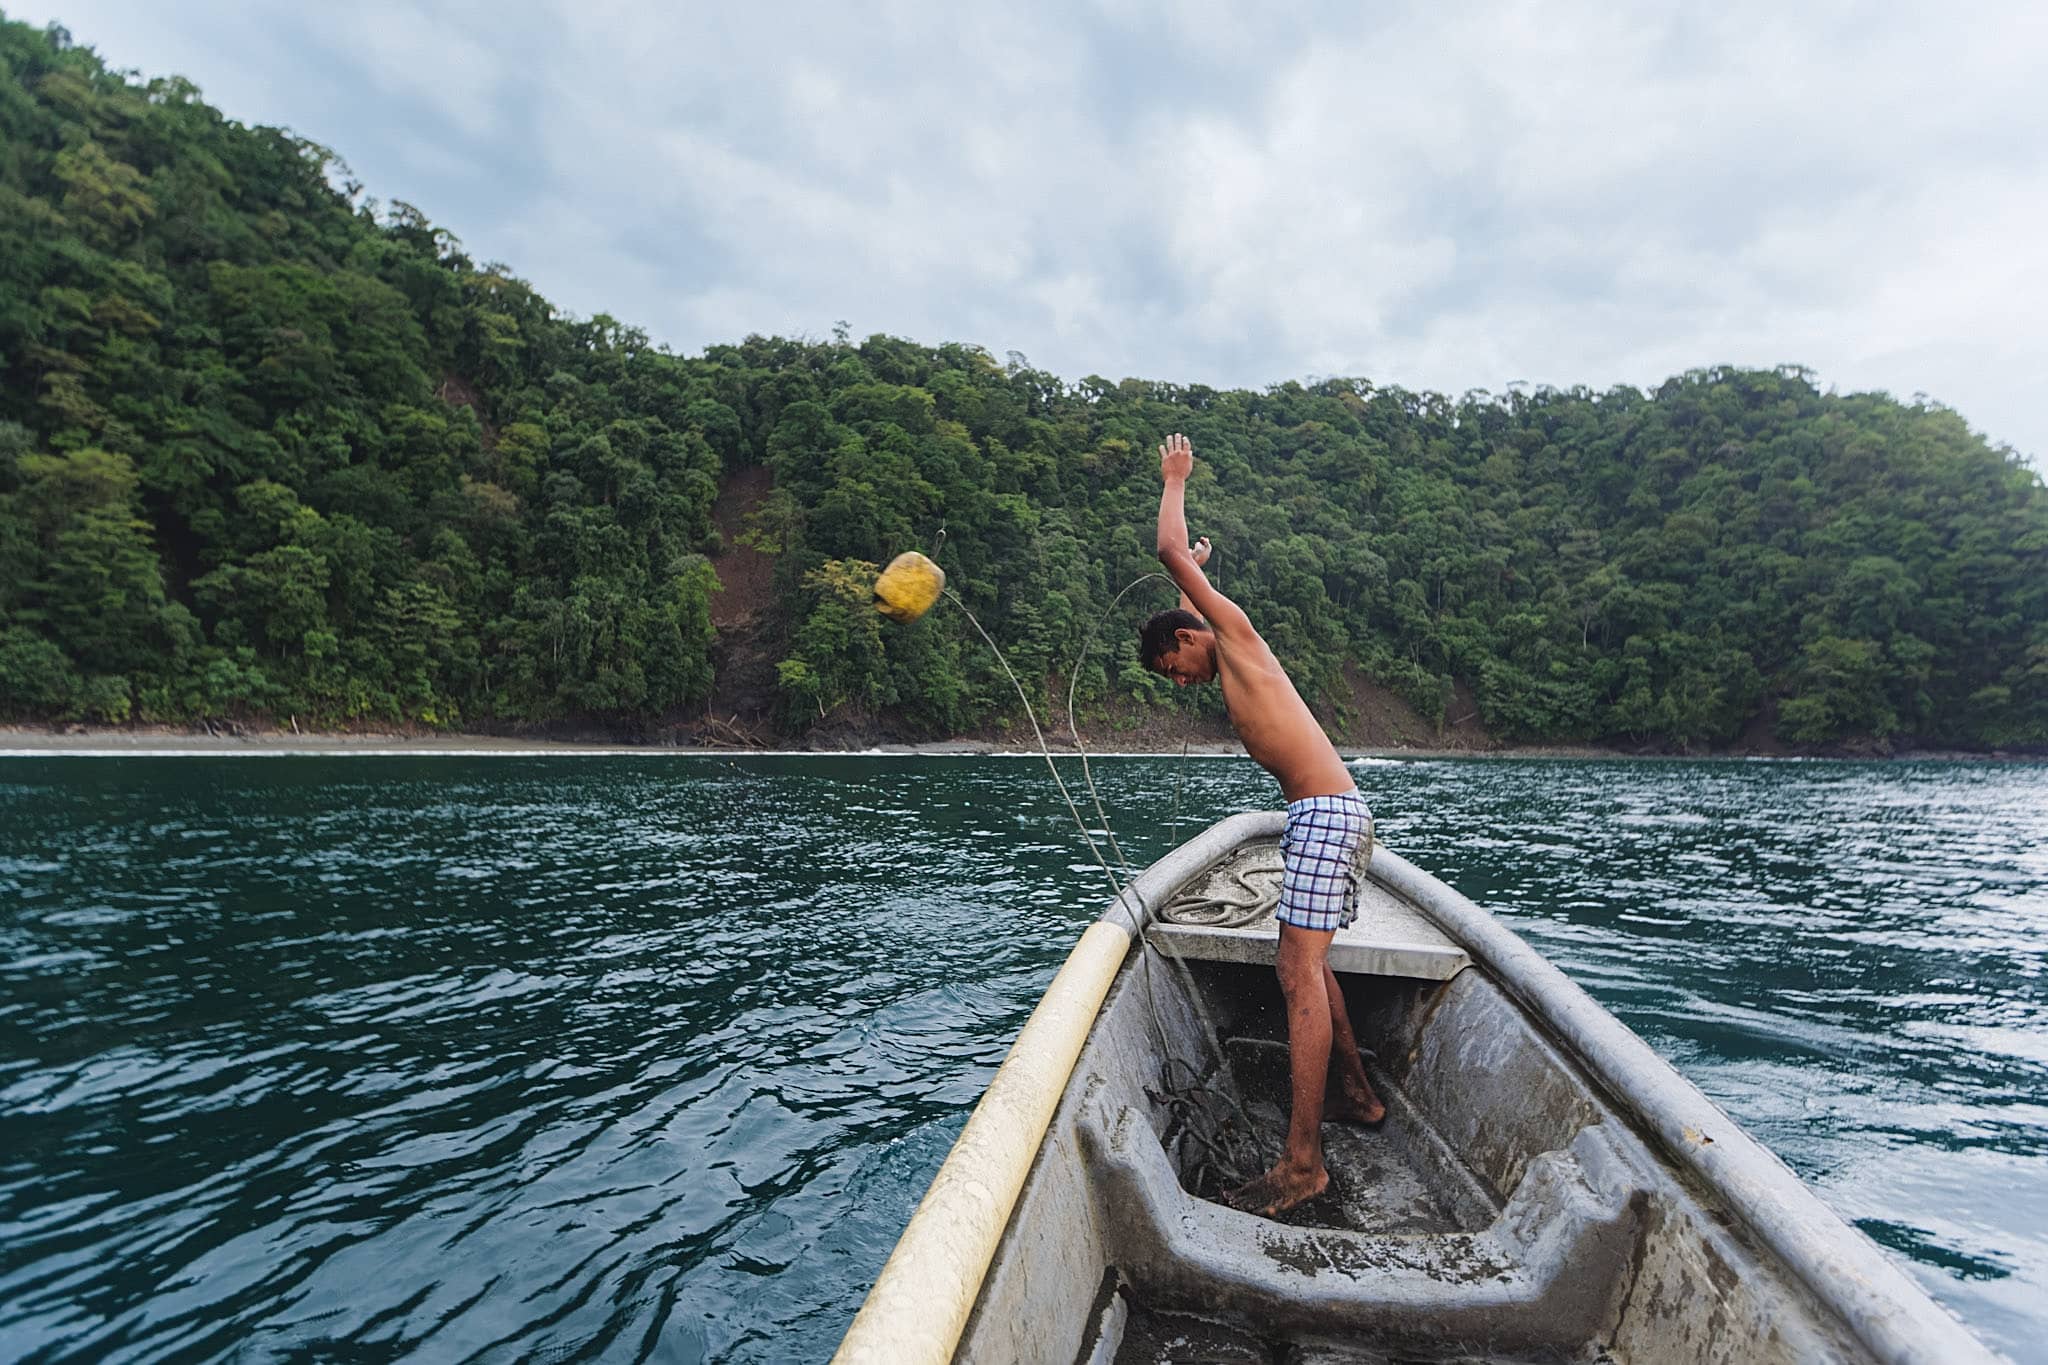 colombian fisherman throwing a buoy to make his net’s location in the chocó